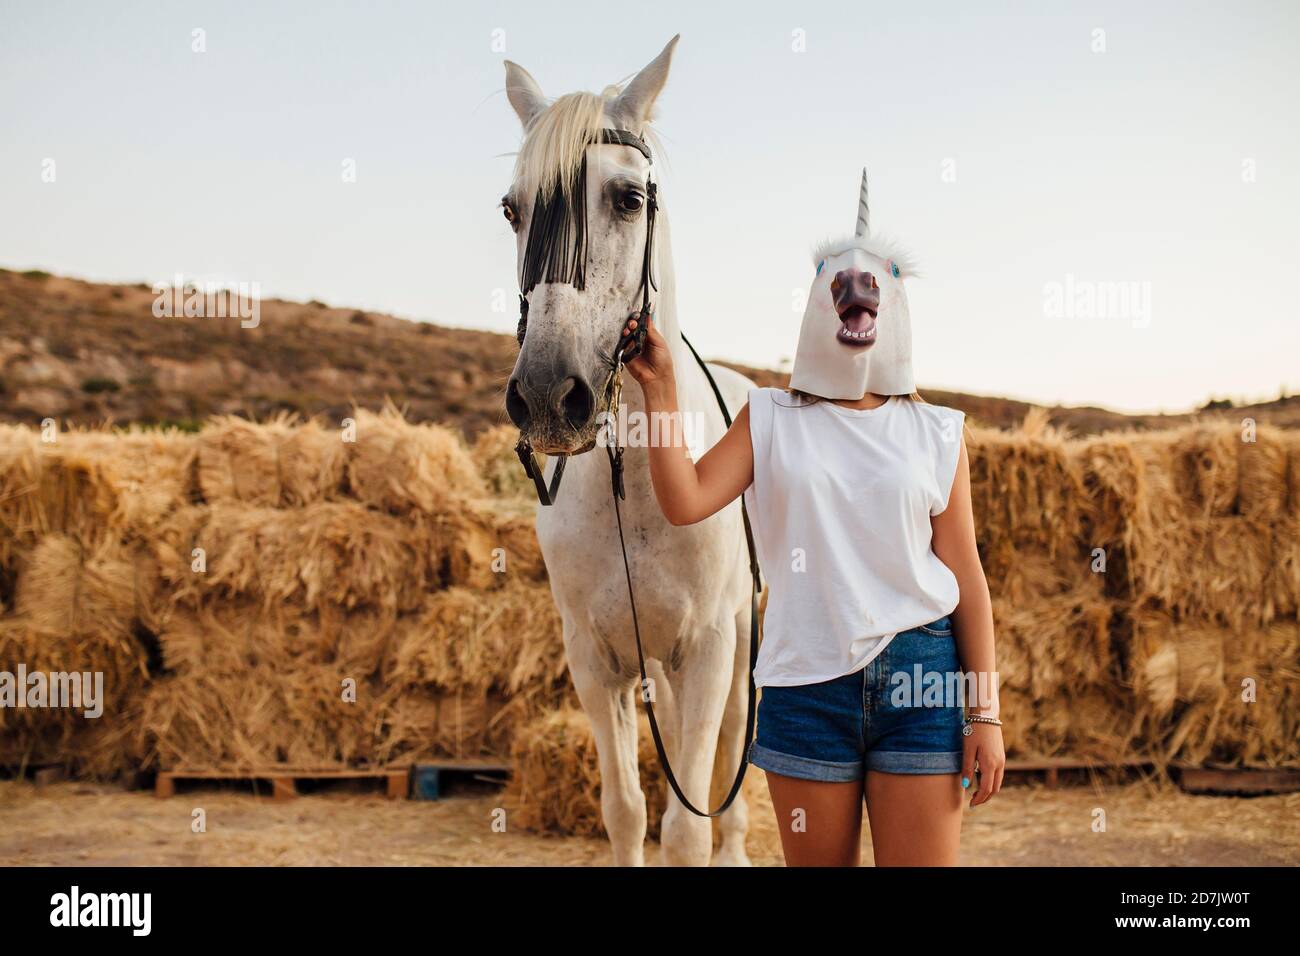 Portrait of white horse and young woman wearing unicorn mask standing side by side Stock Photo